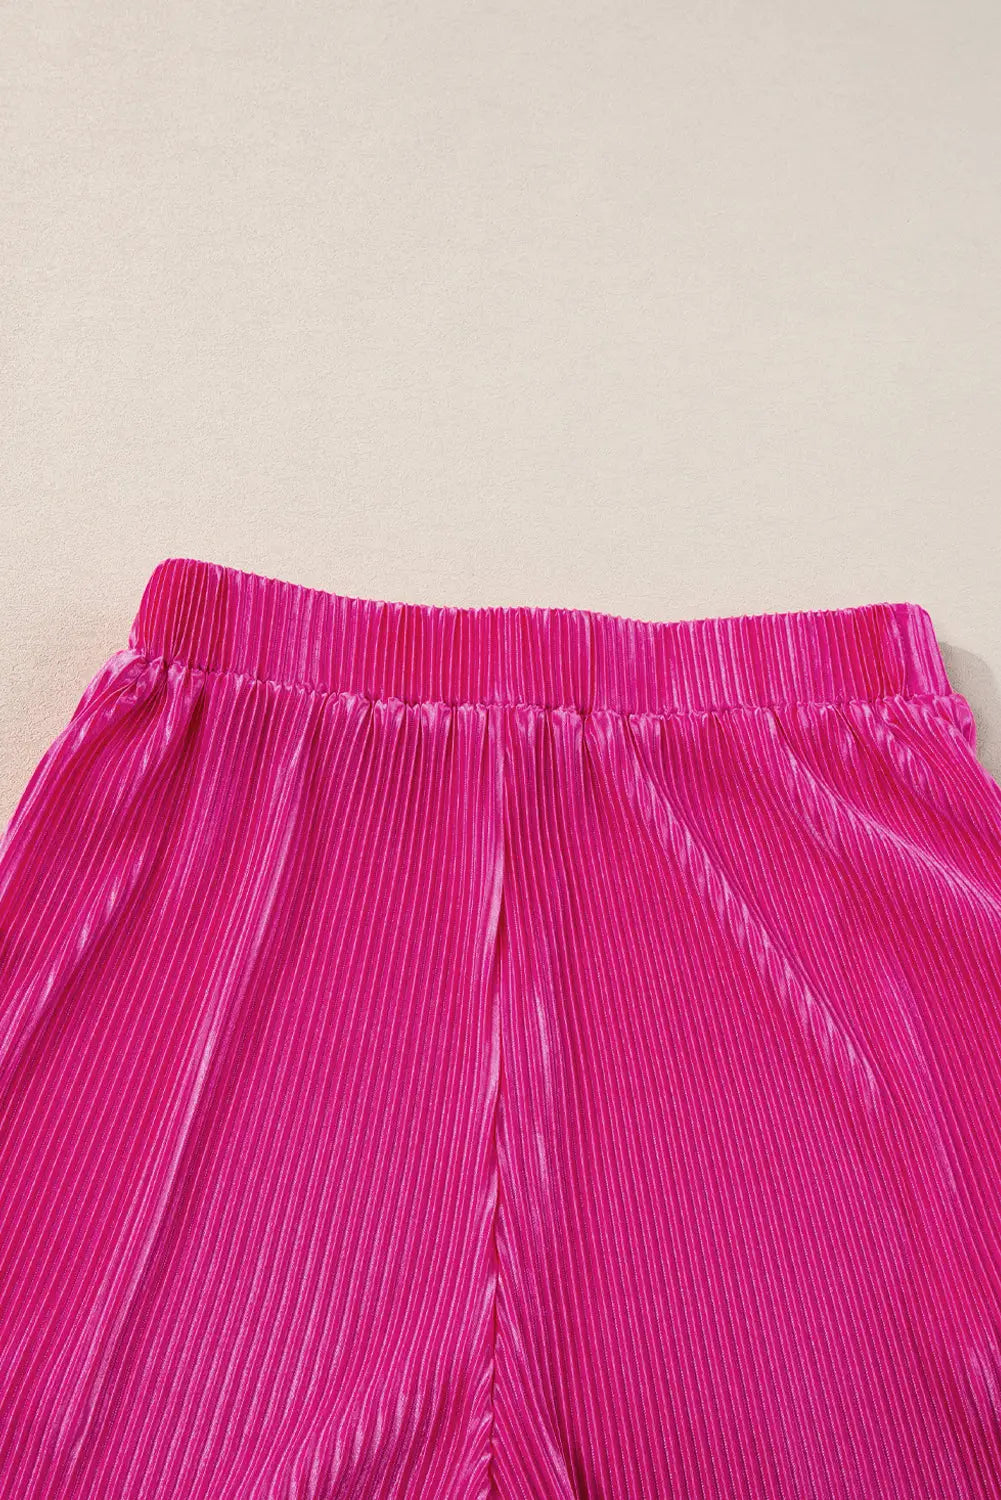 Casual pleated shorts matching set - two piece sets